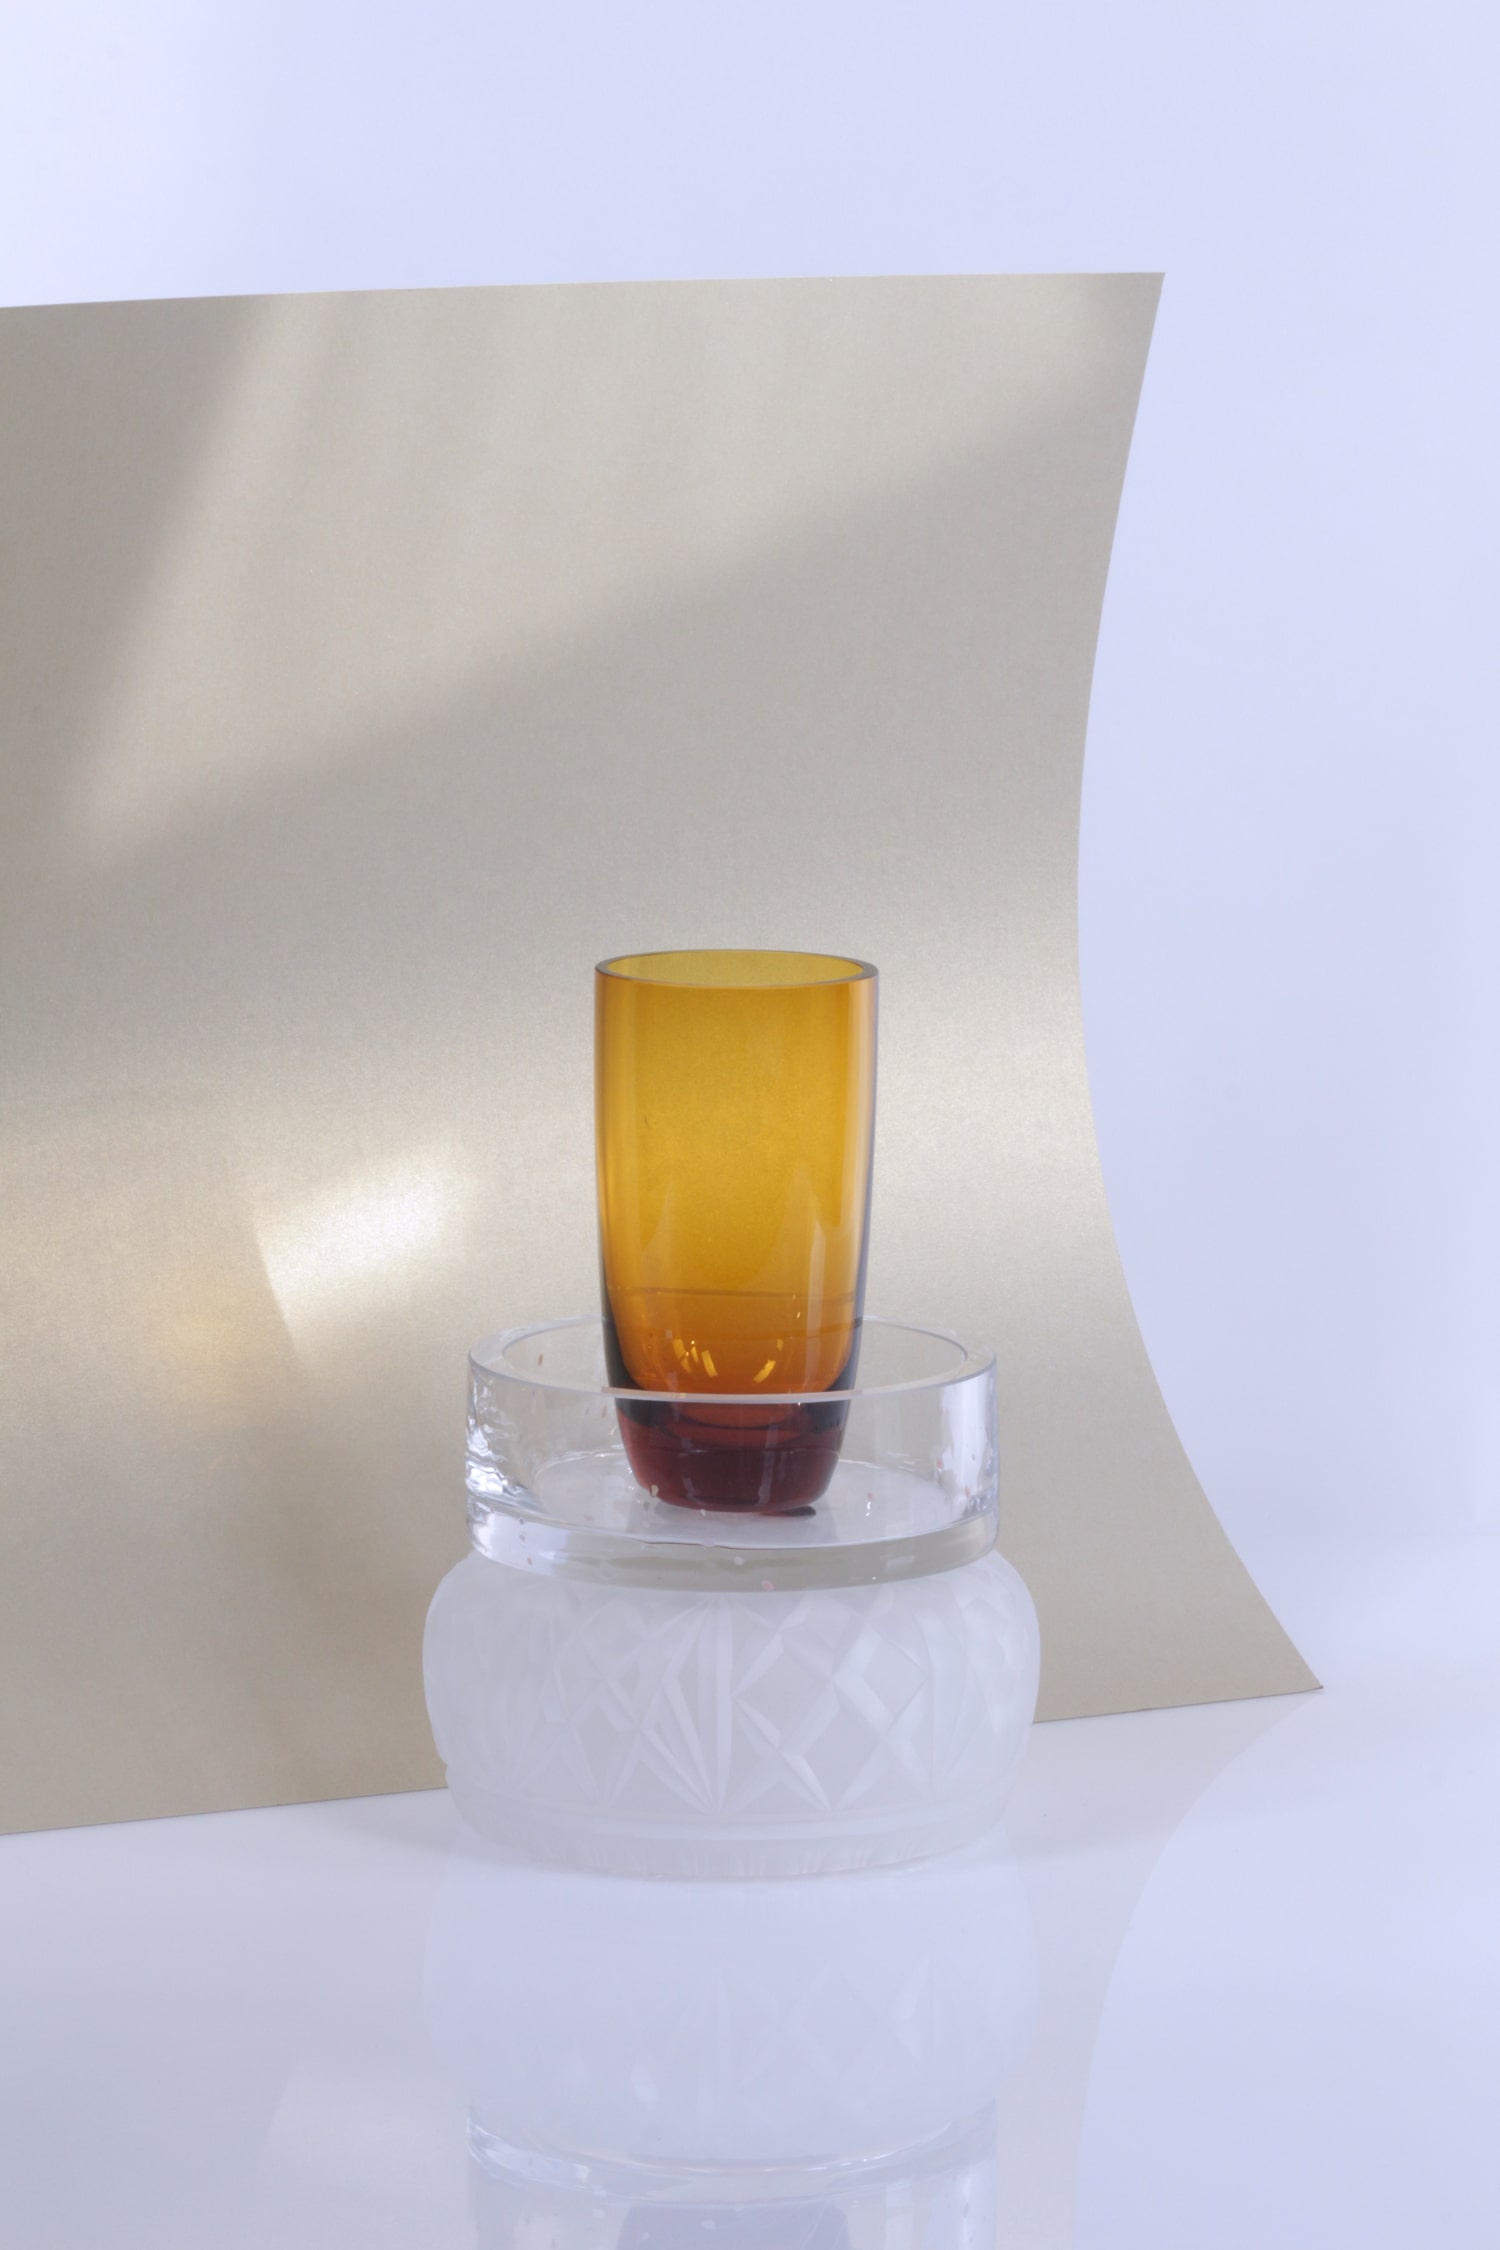 Lotus Symbols of now glass object from Heritage Contemporary collection design by Jiri Krejcirik Solitary Glass